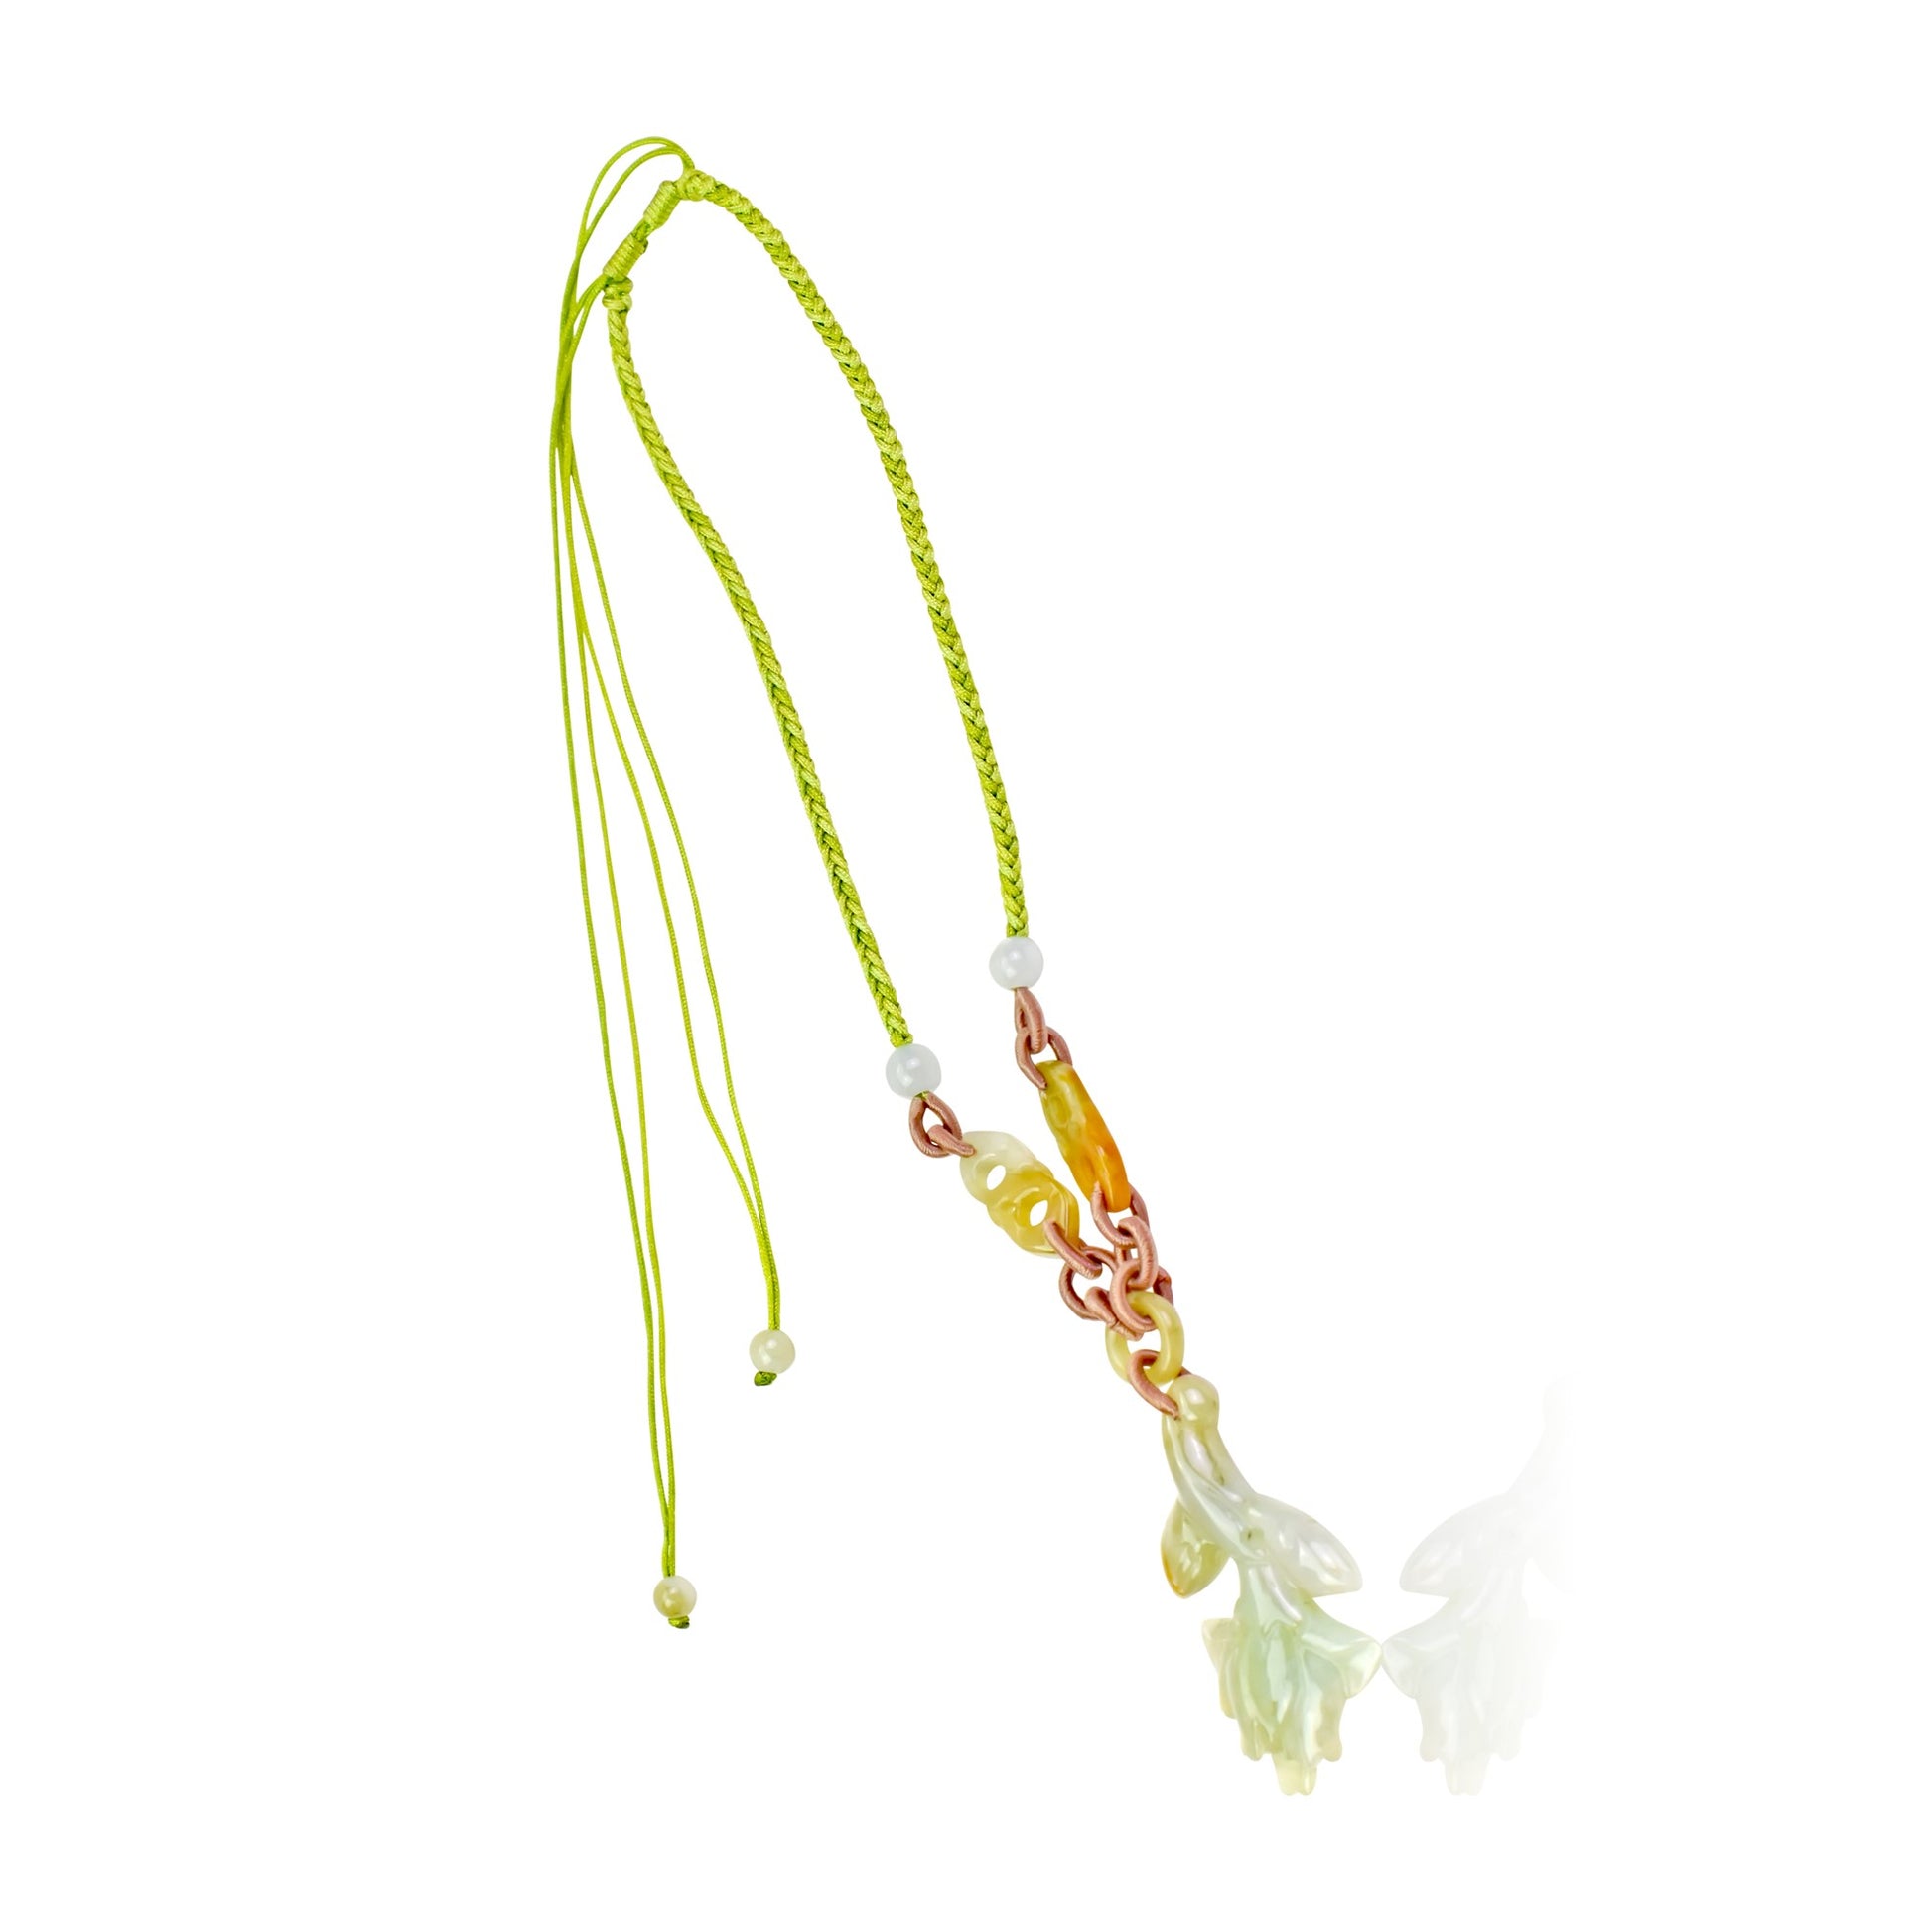 Show Your Strength and Resilience with a Protea Flower Necklace made with Lime Cord